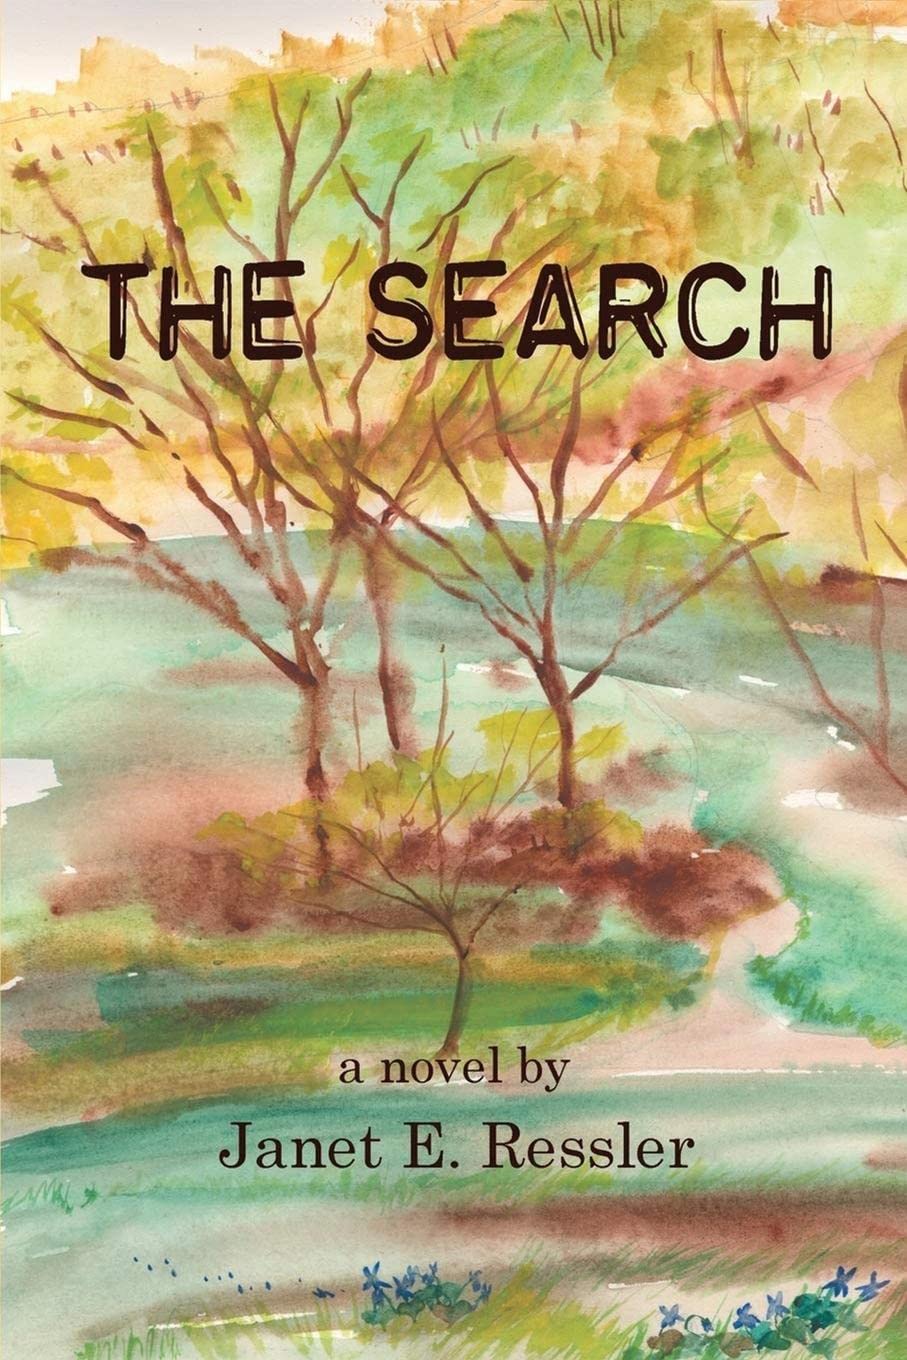 Author's Tranquility Press Presents "The Search" - A Captivating Tale of Faith, Love, and Redemption